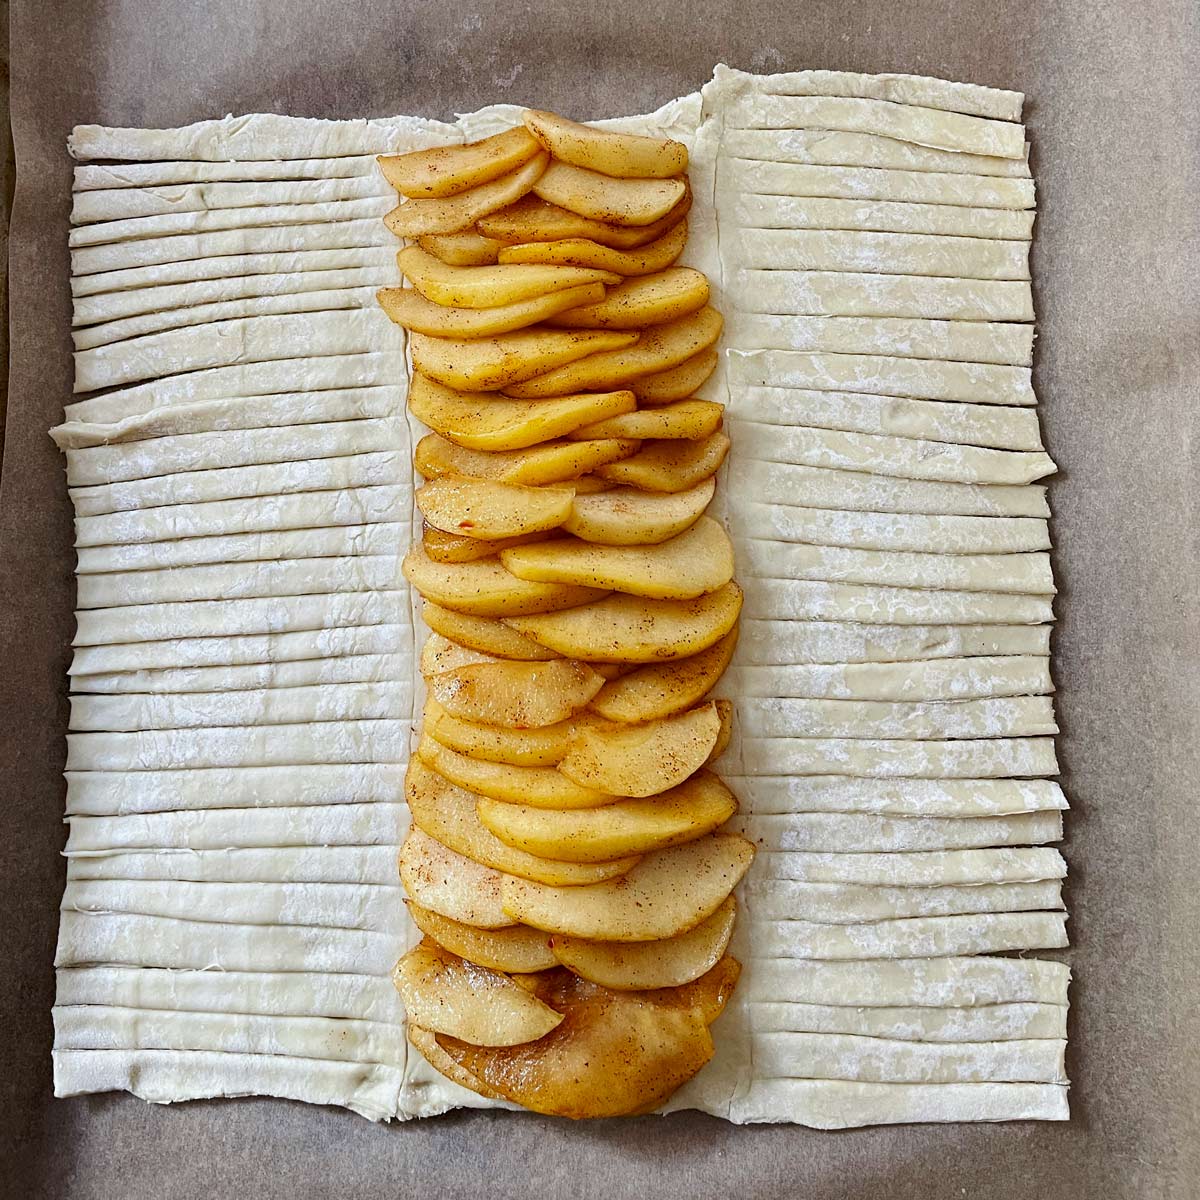 Cut pastry with apples down the center.